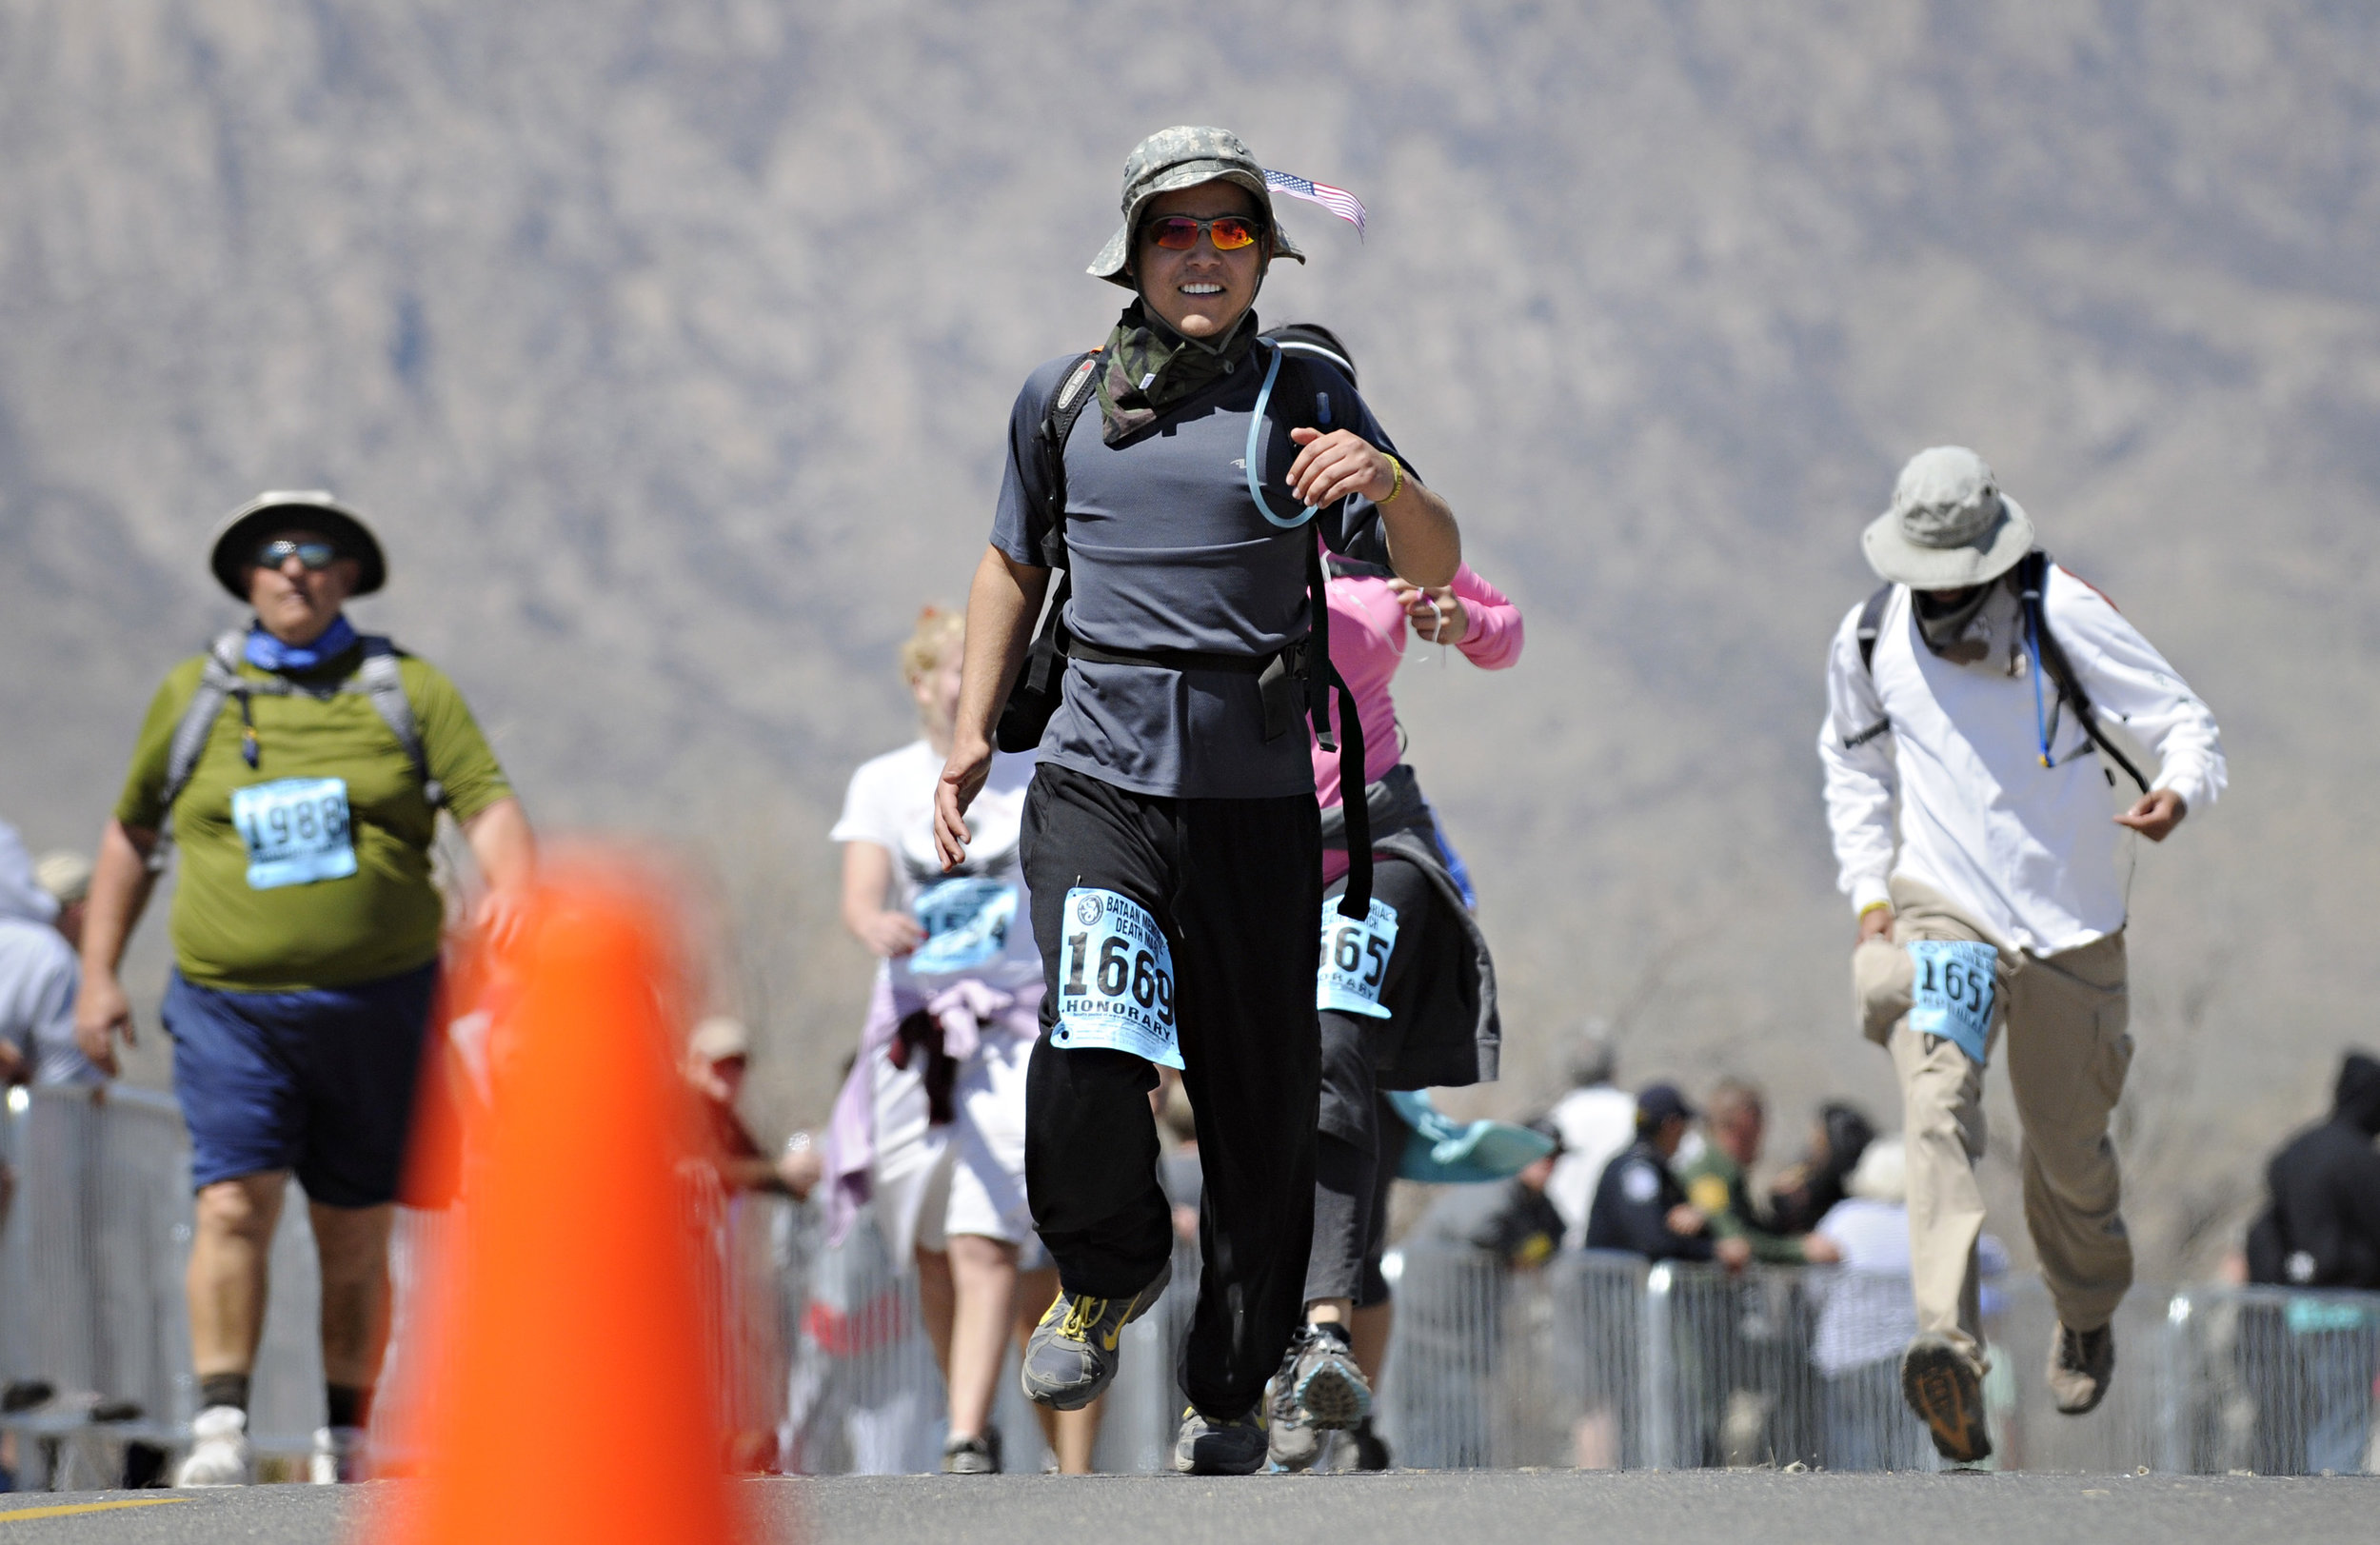  A runner comes down the home stretch of his 15.2-mile run during the 22nd Annual Bataan Memorial Death March at White Sands Missile Range, Sunday, March 27, 2011. (Morgan Petroski/Albuquerque Journal) 